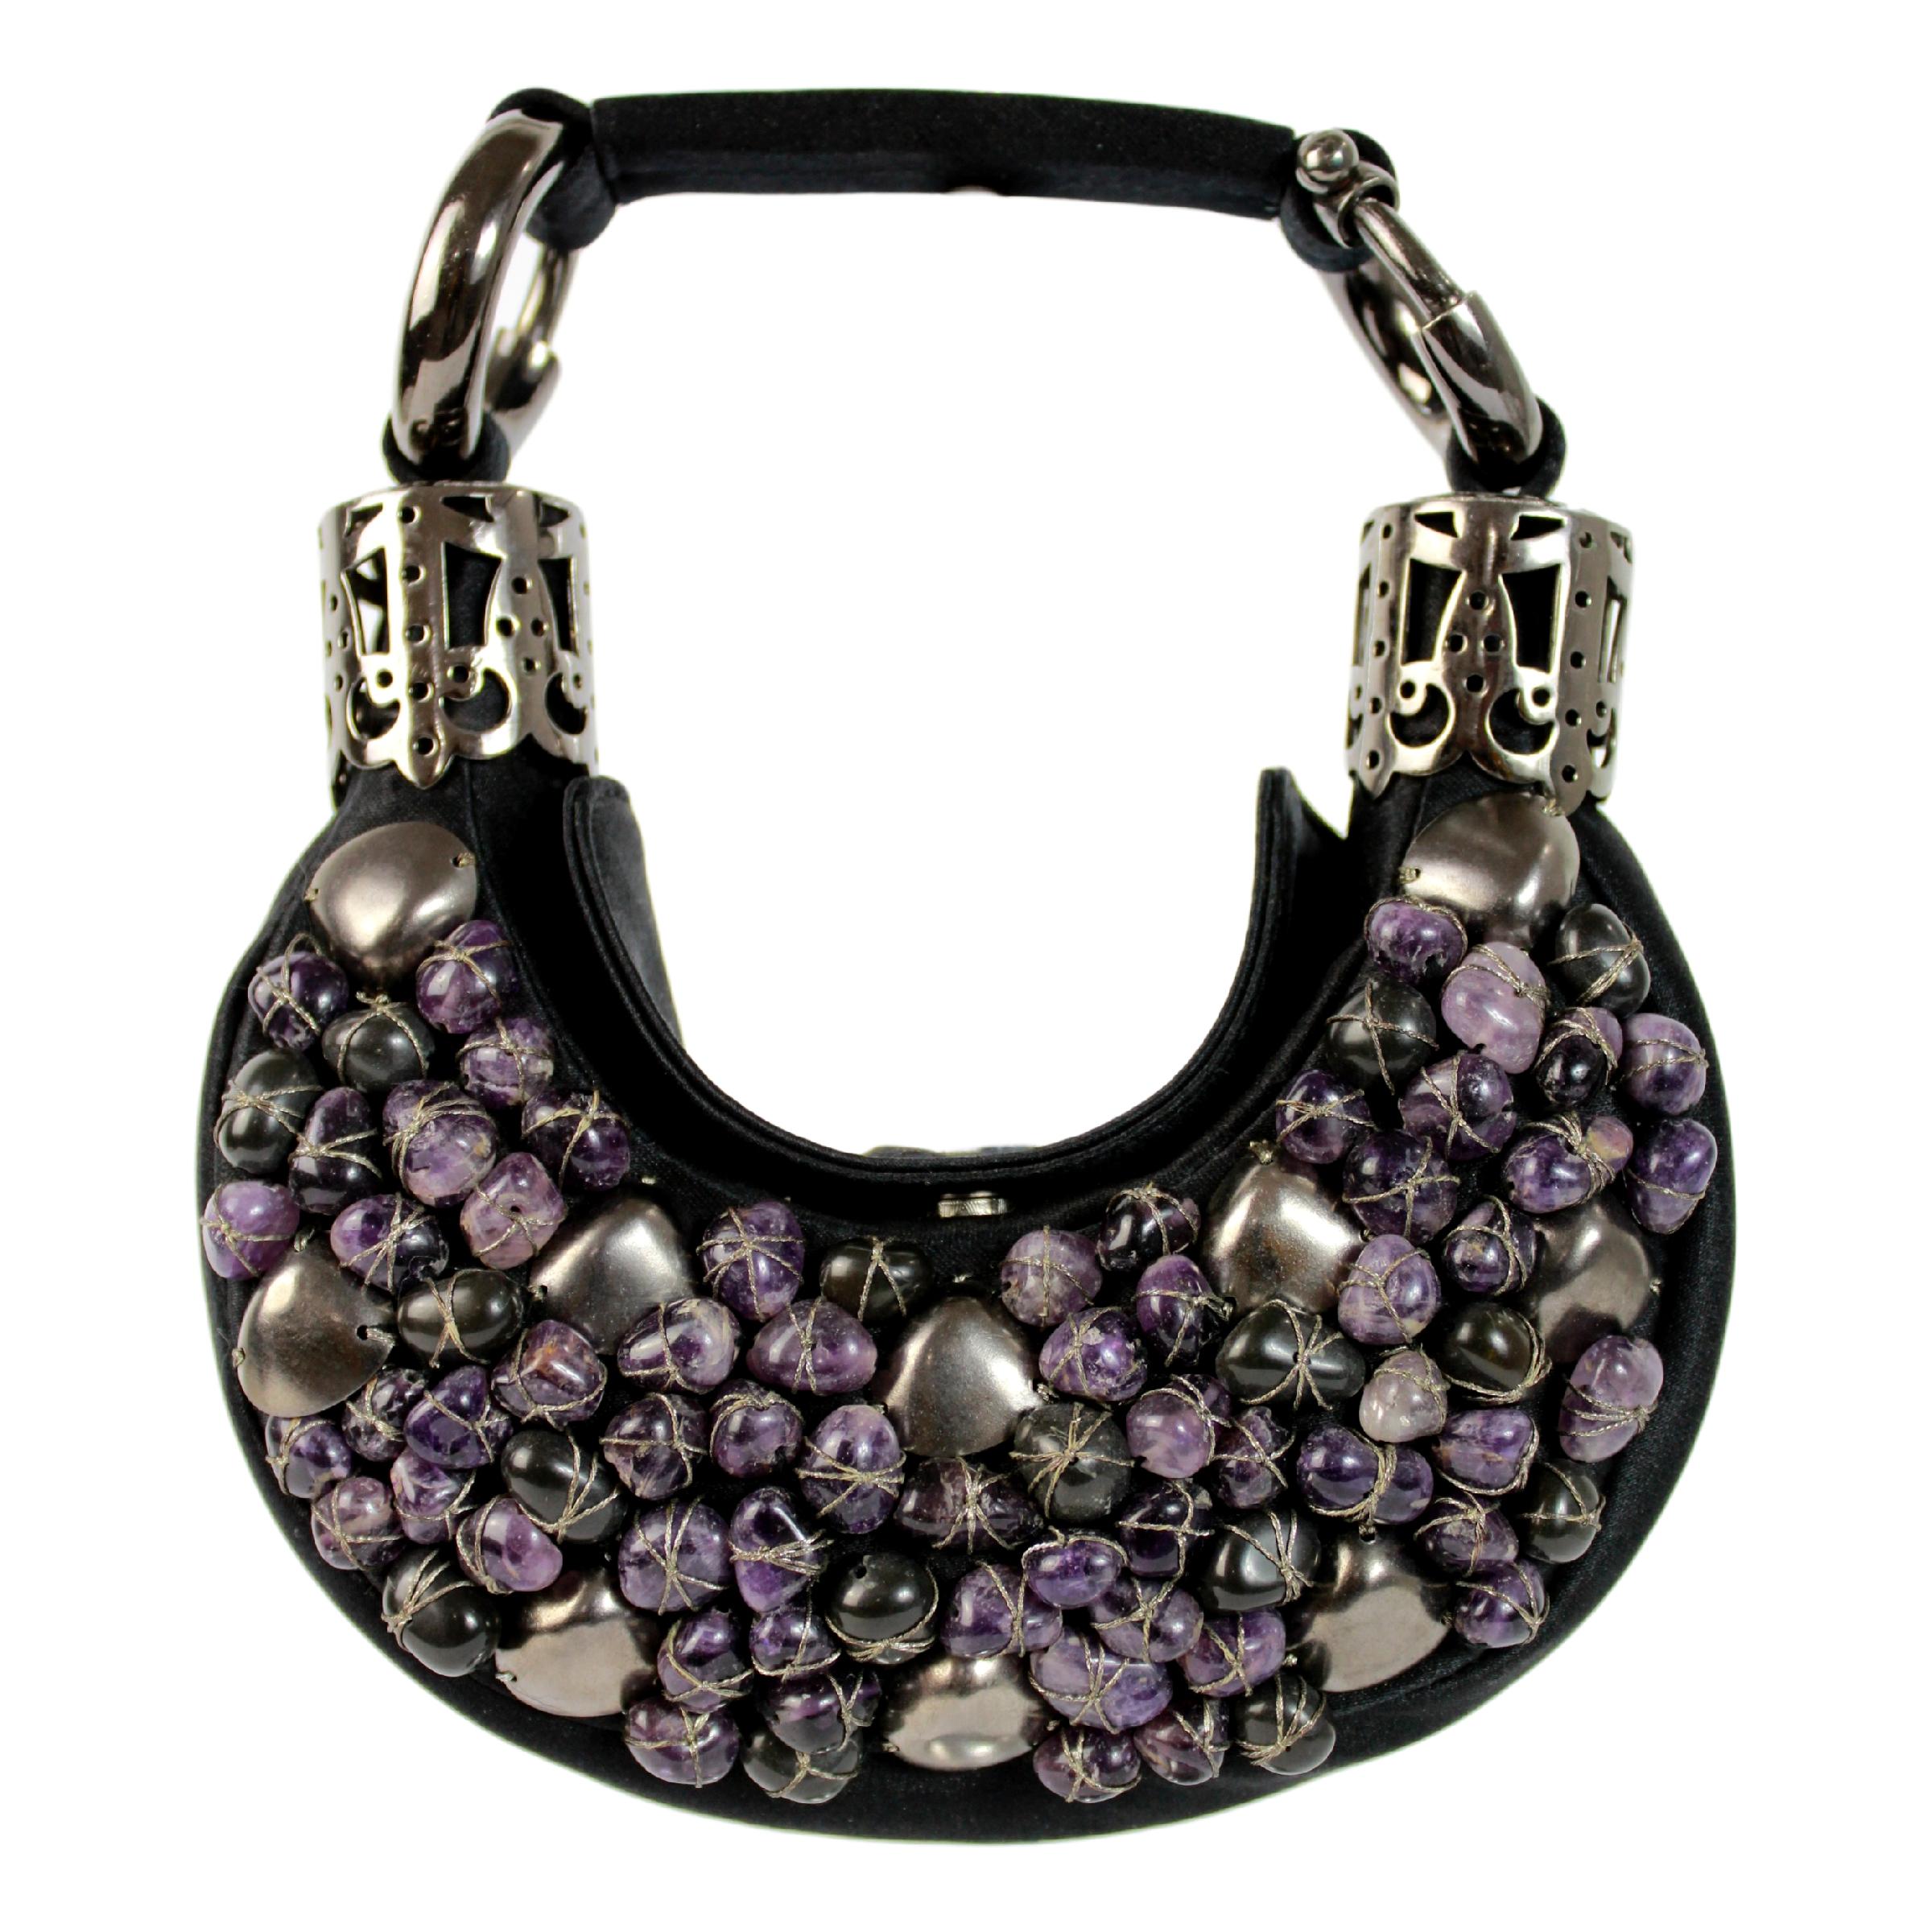 Chloe evening handbag. Black jewelery clutch bag, covered with purple-colored hard stones, silver-colored handle, clip button closure, 2000s. Made in Italy. Excellent vintage condition

Width: 18 cm
Height: 9 cm
Depth: 3 cm